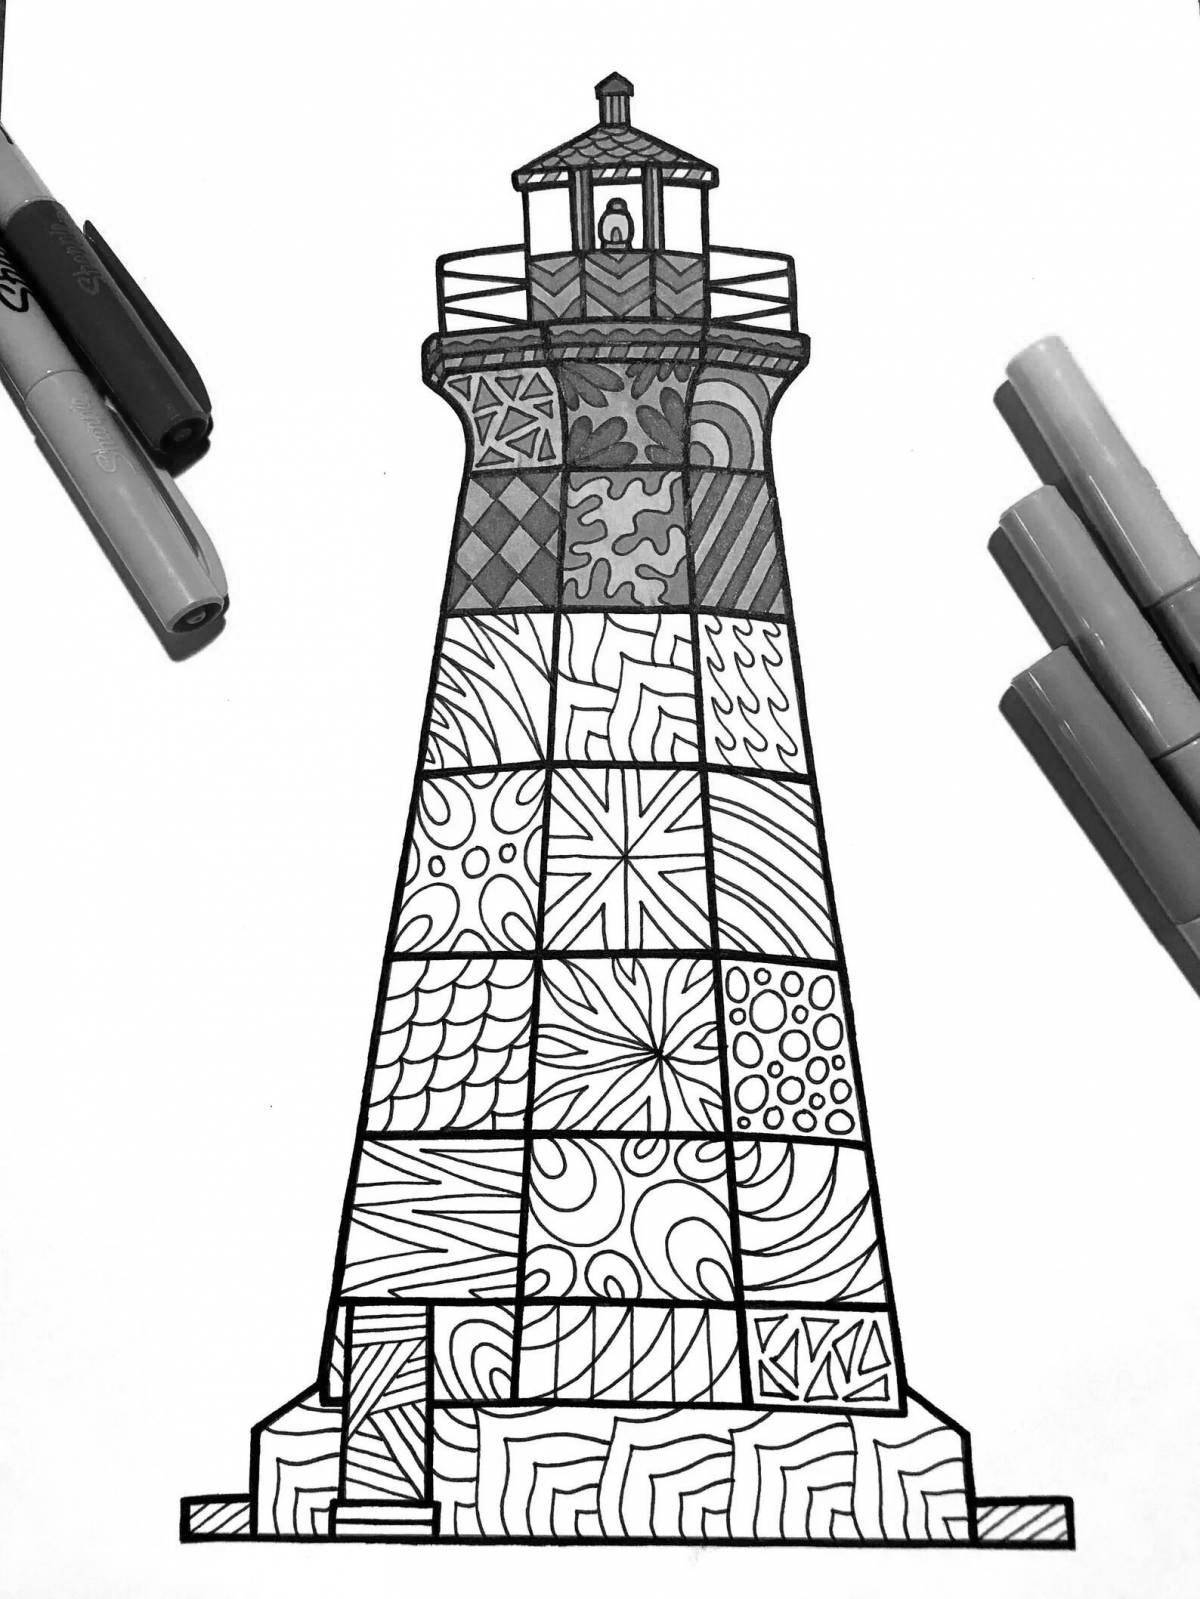 Adorable tower coloring book for kids